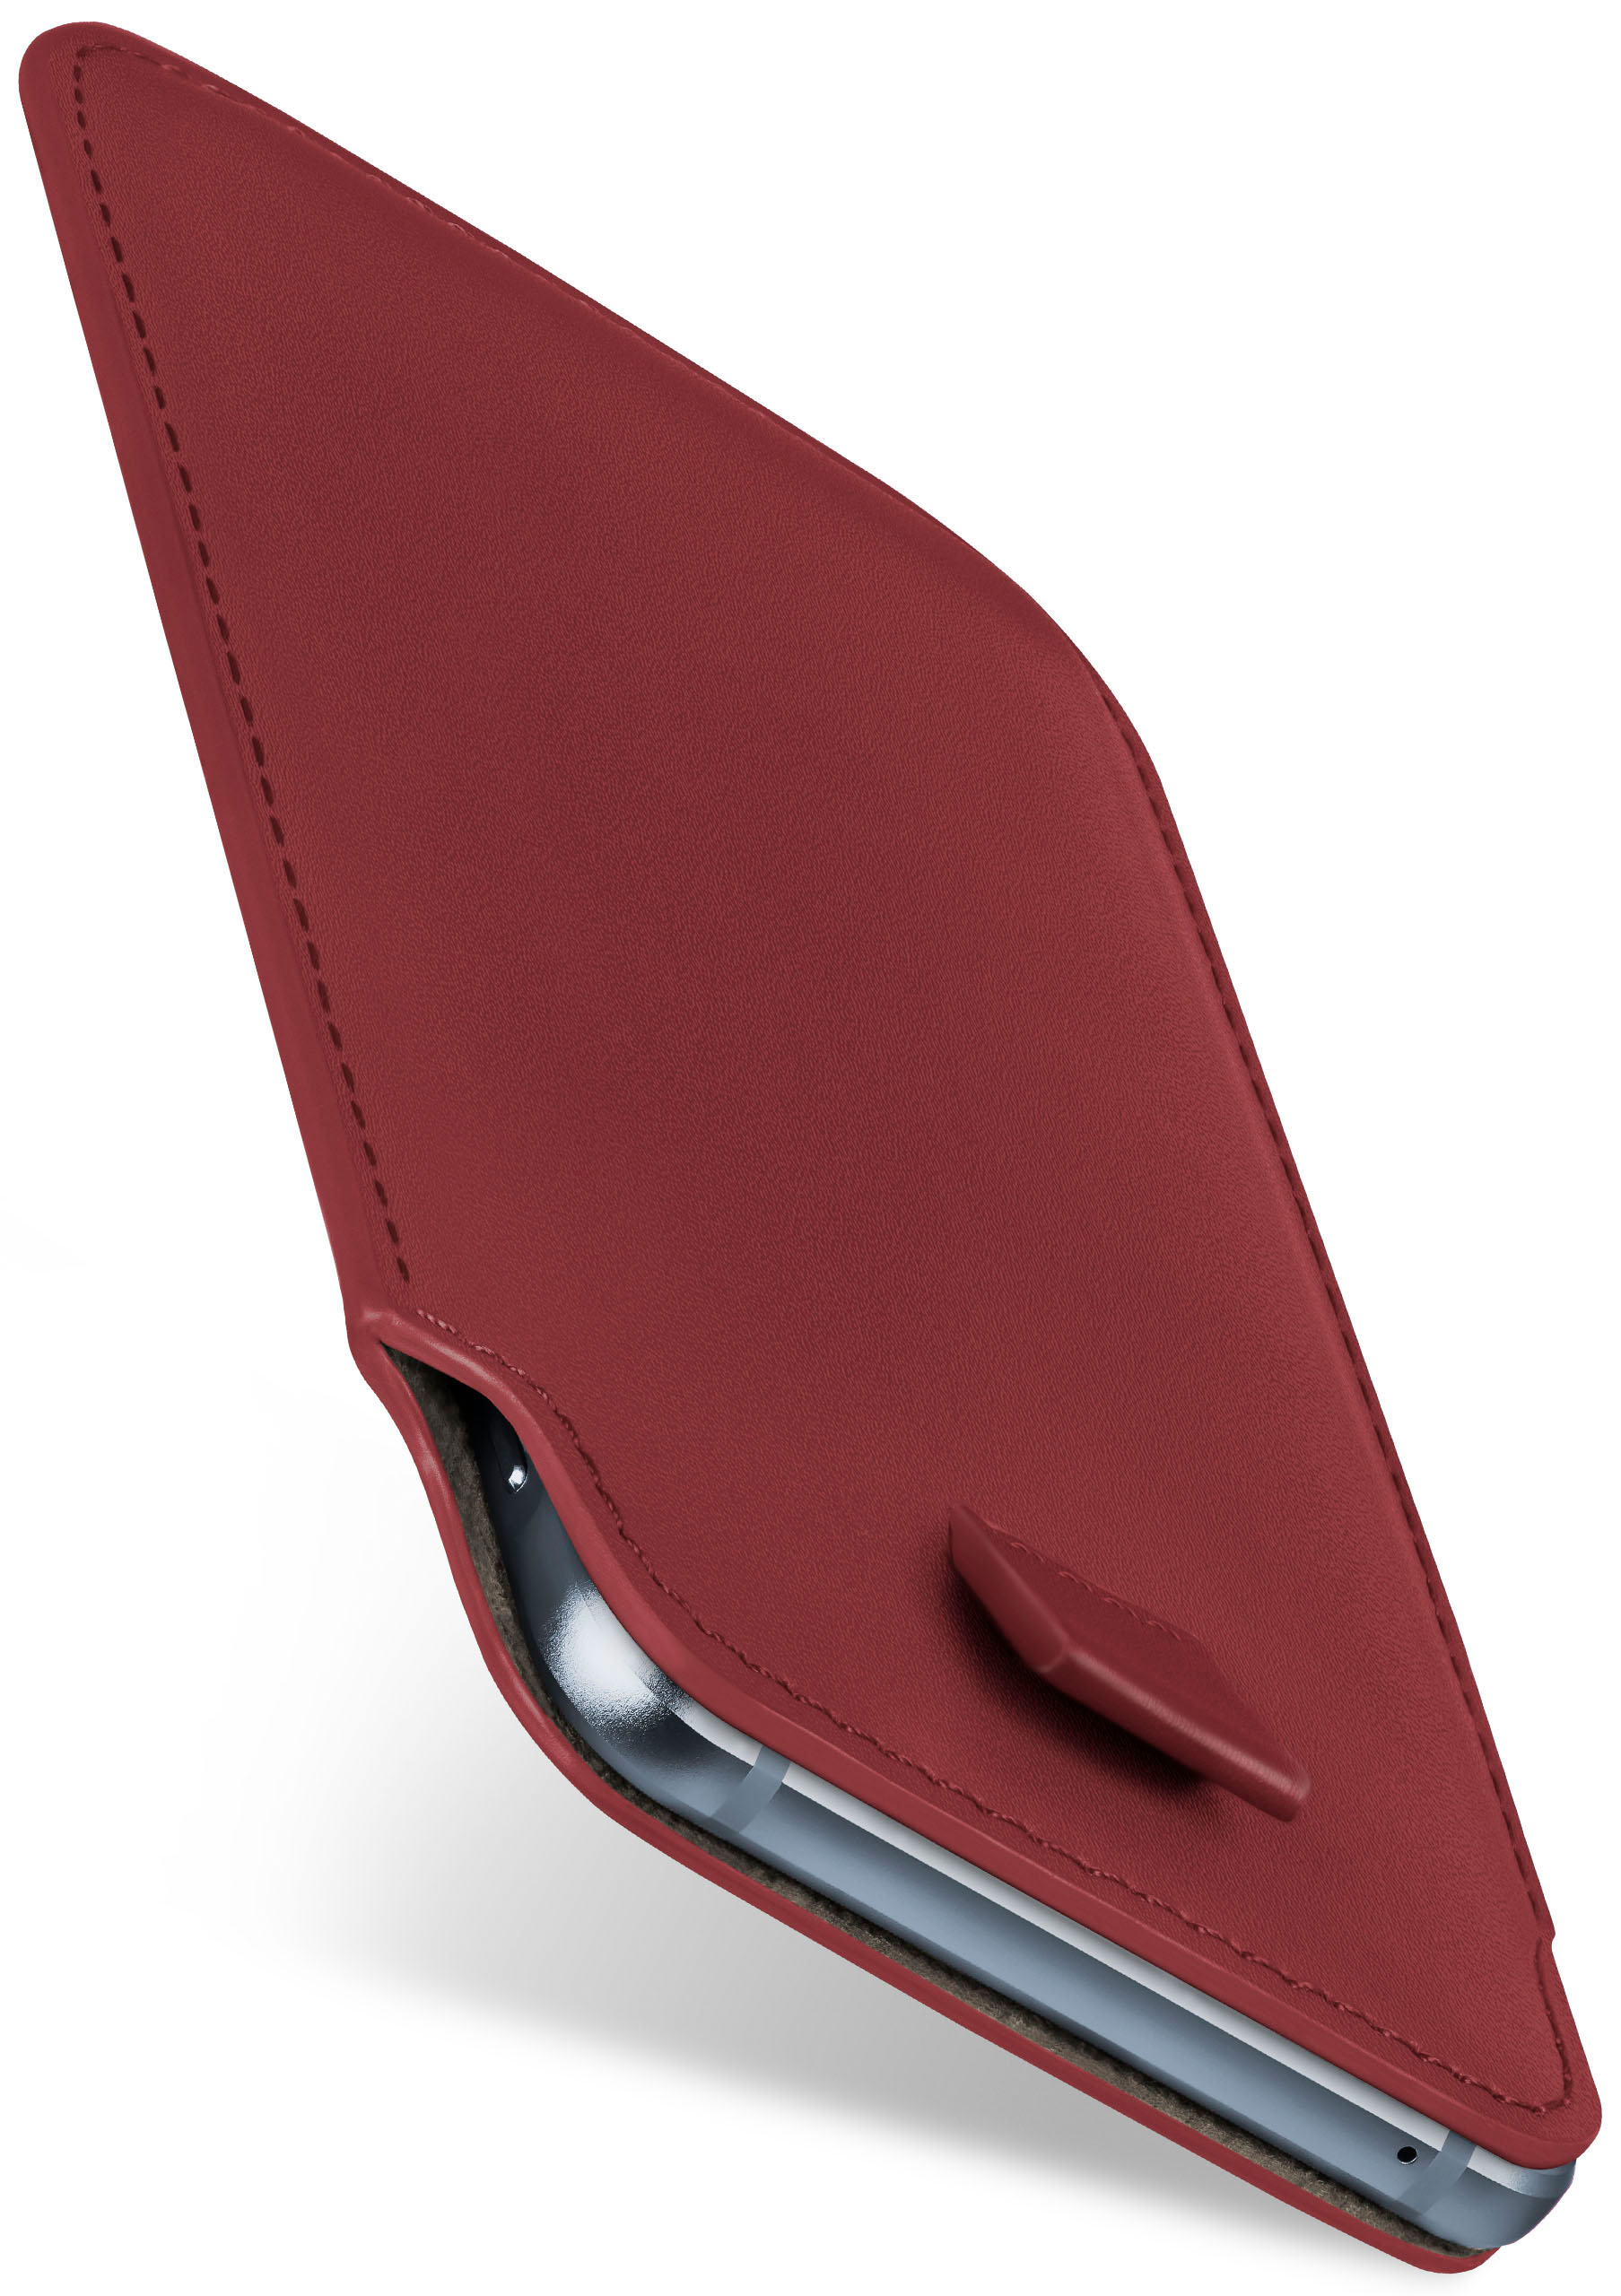 Case, Xperia Maroon-Red Compact, Slide Sony, XZ1 Cover, MOEX Full